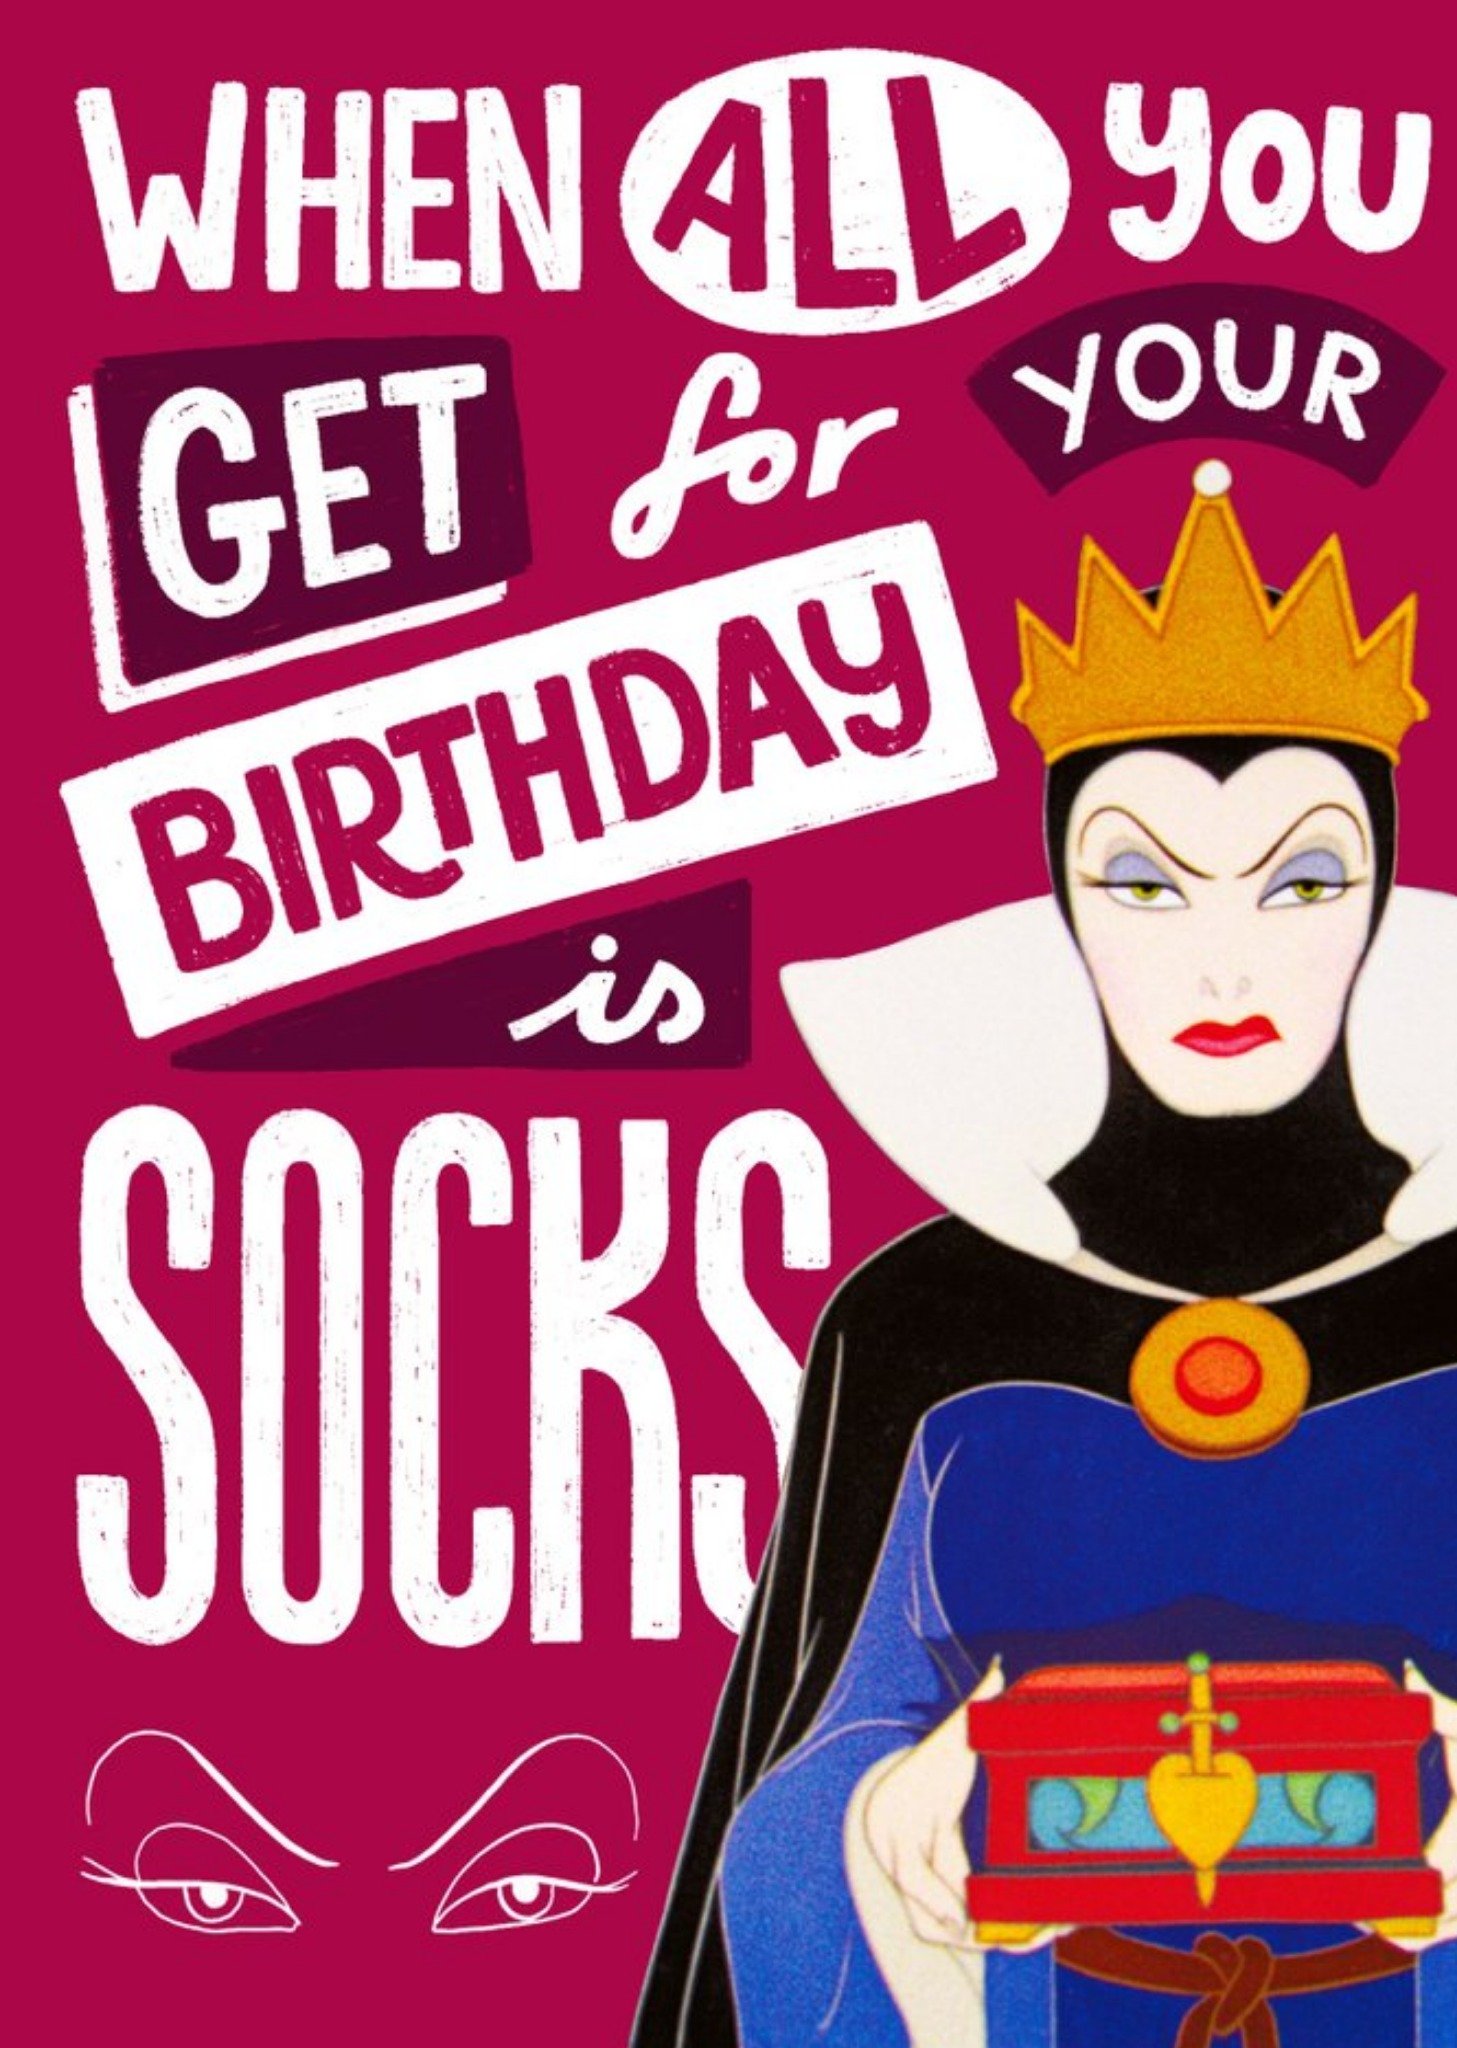 Disney Snow White's Evil Queen All You Get Is Socks Funny Birthday Card, Large